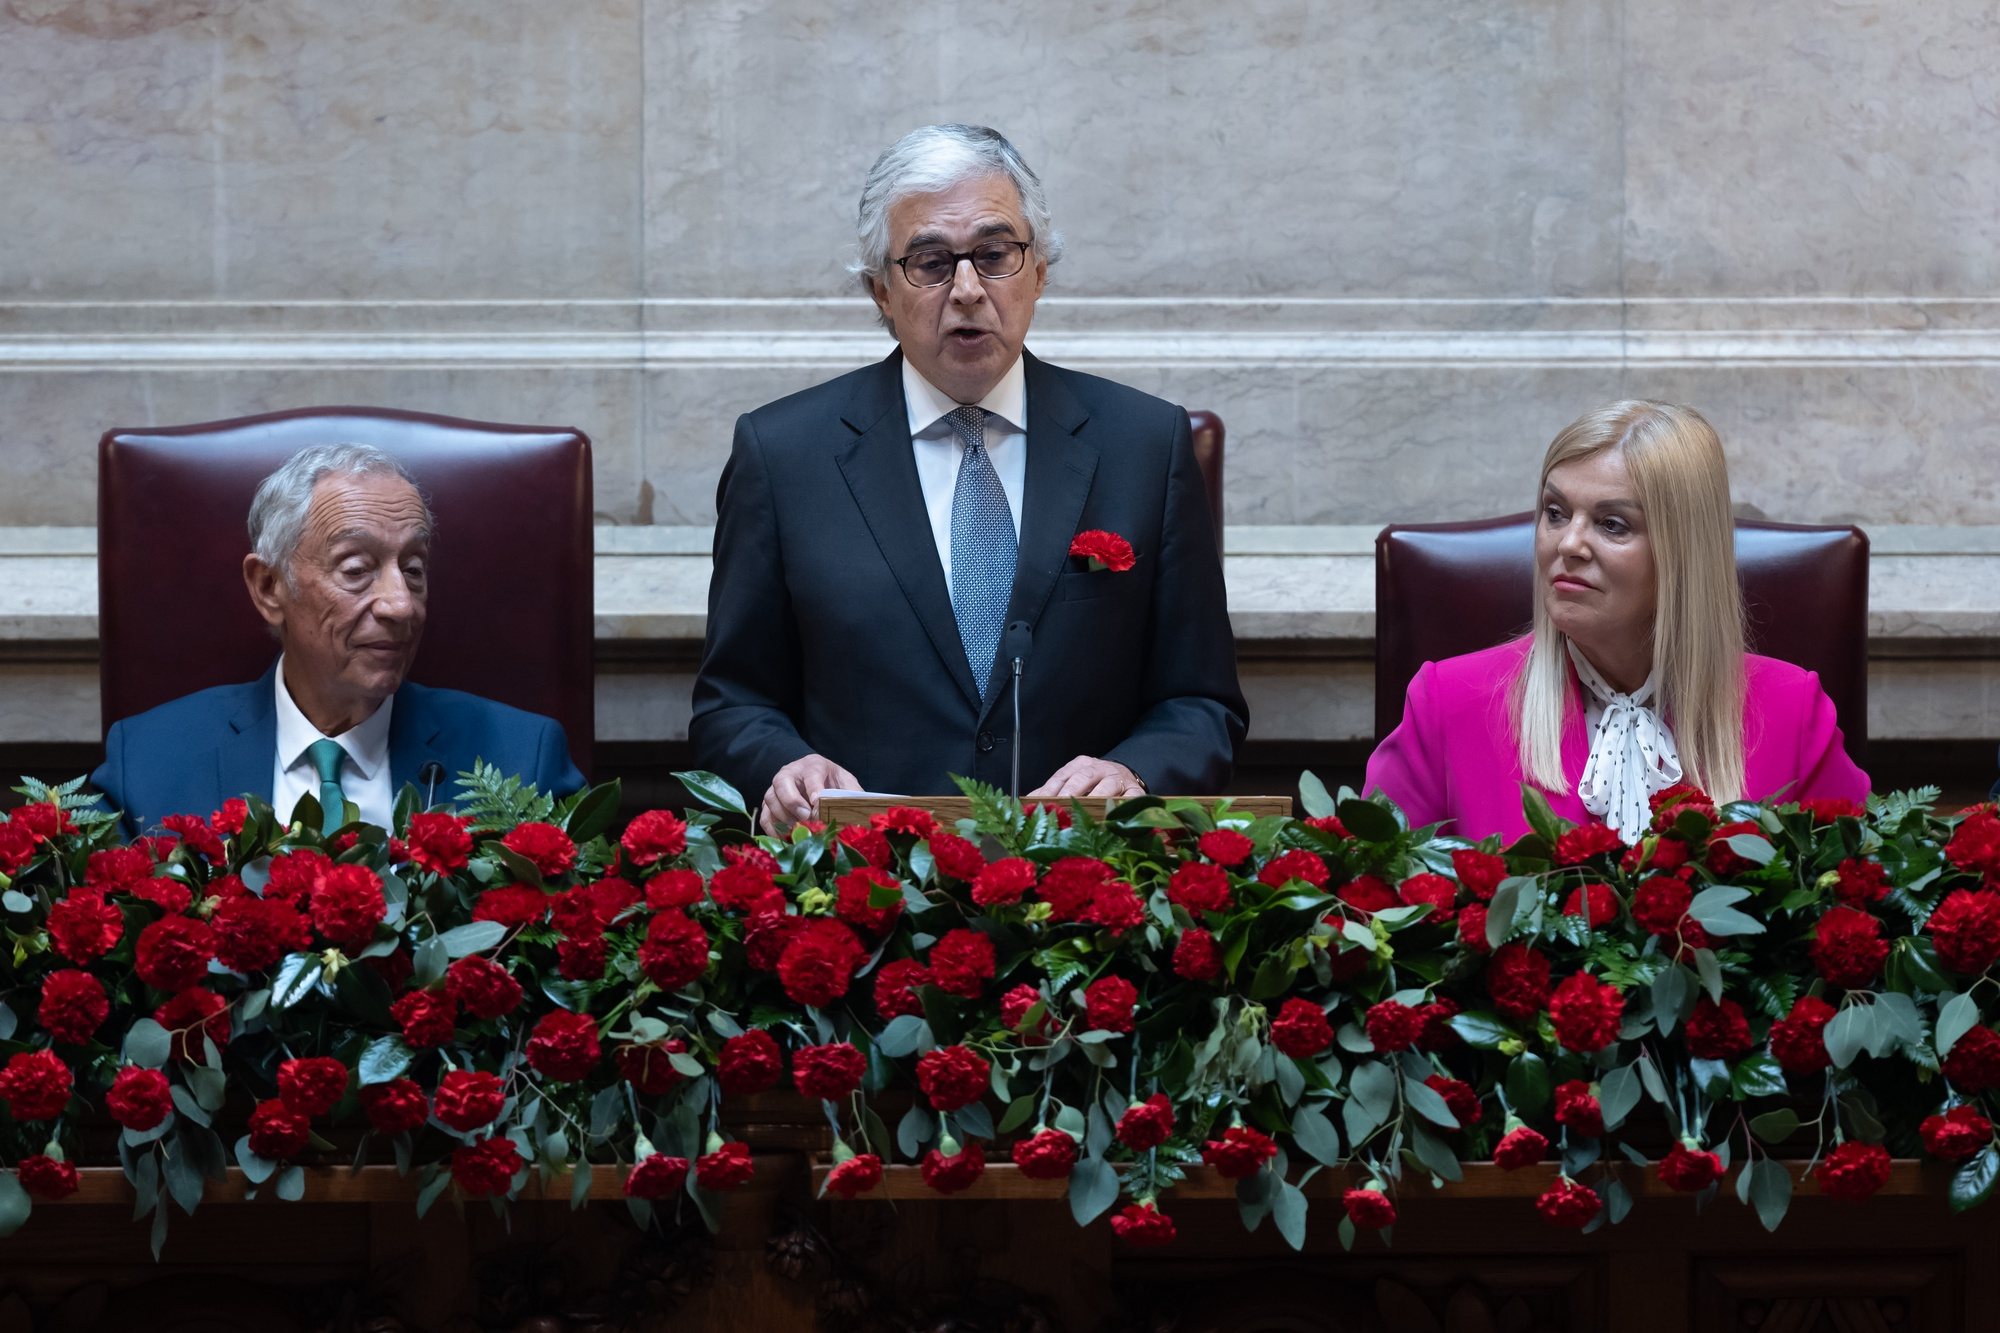 Portuguese president of the parliament, Jose Pedro Aguiar Branco (C), flanked by the Portuguese President, Marcelo Rebelo de Sousa, delivers a speech during the solemn comemorative session at the Portuguese parliament in Lisbon, Portugal, 25 April 2024. Portugal celebrates the 50th anniversary of the Carnation Revolution that ended the authoritarian regime of Estado Novo (New State) that ruled the country between 1926 to 1974. JOSE SENA GOULAO/LUSA